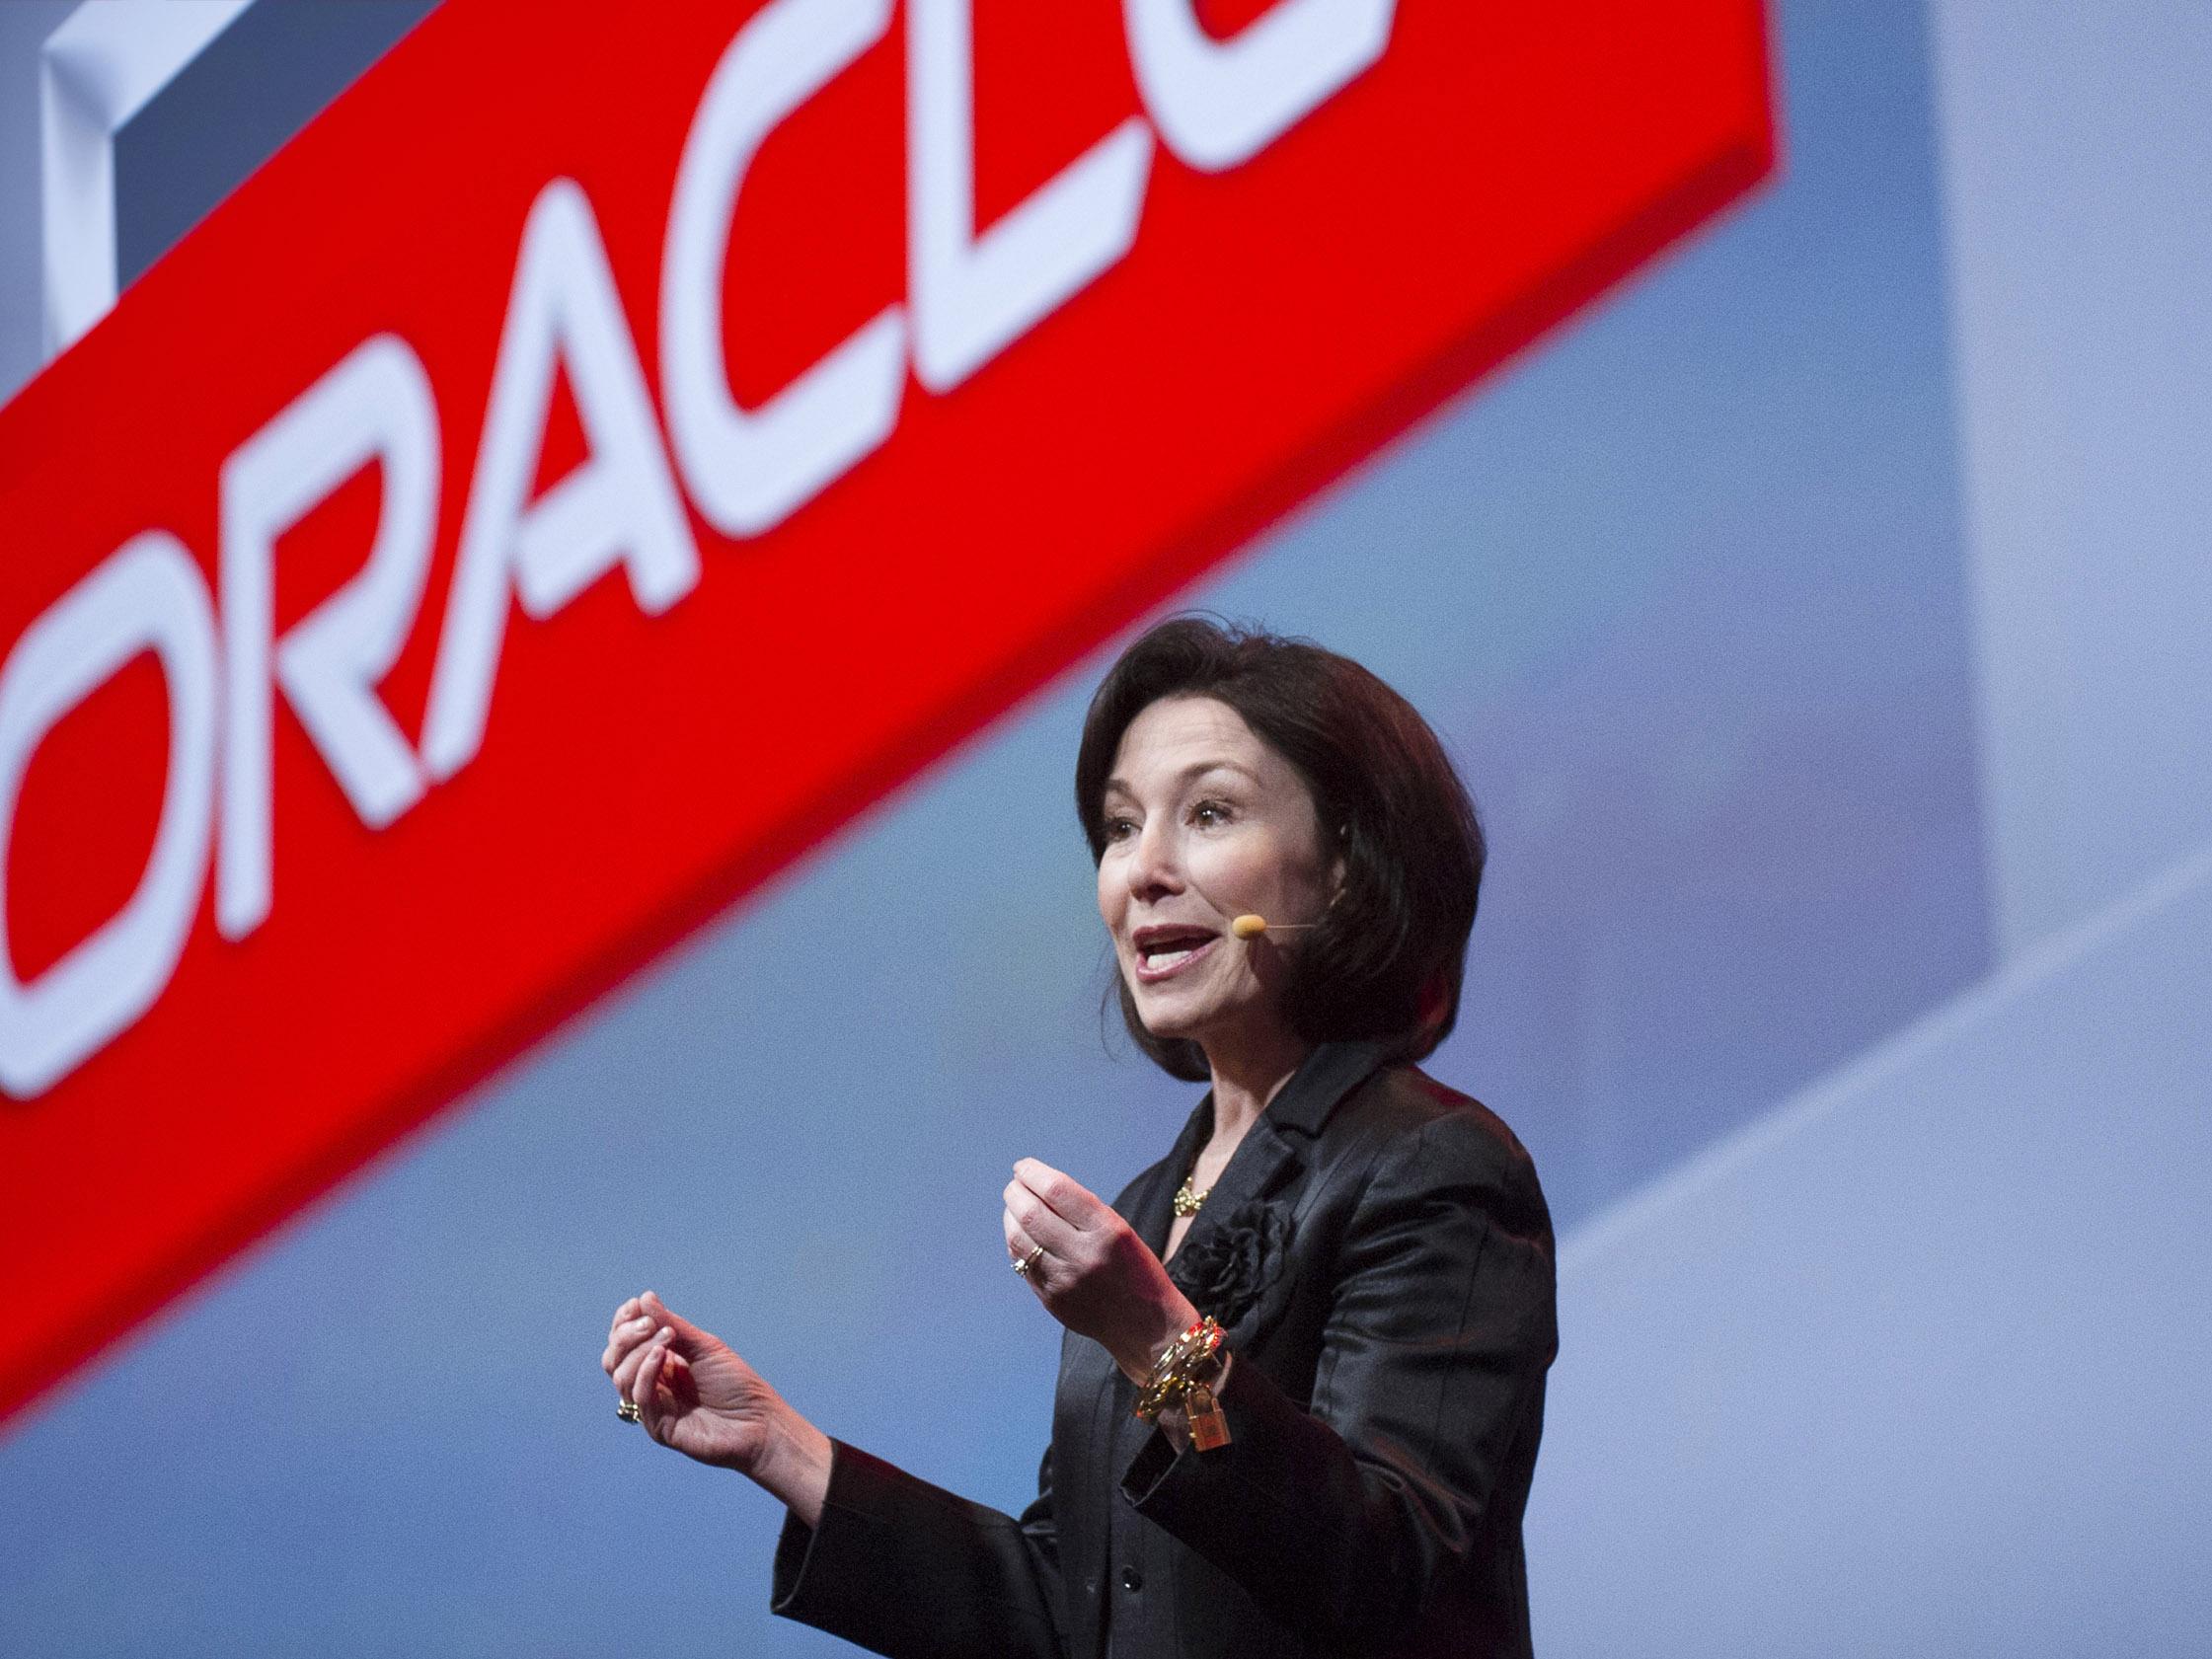 Will a revenue boost keep Oracle’s share price afloat?